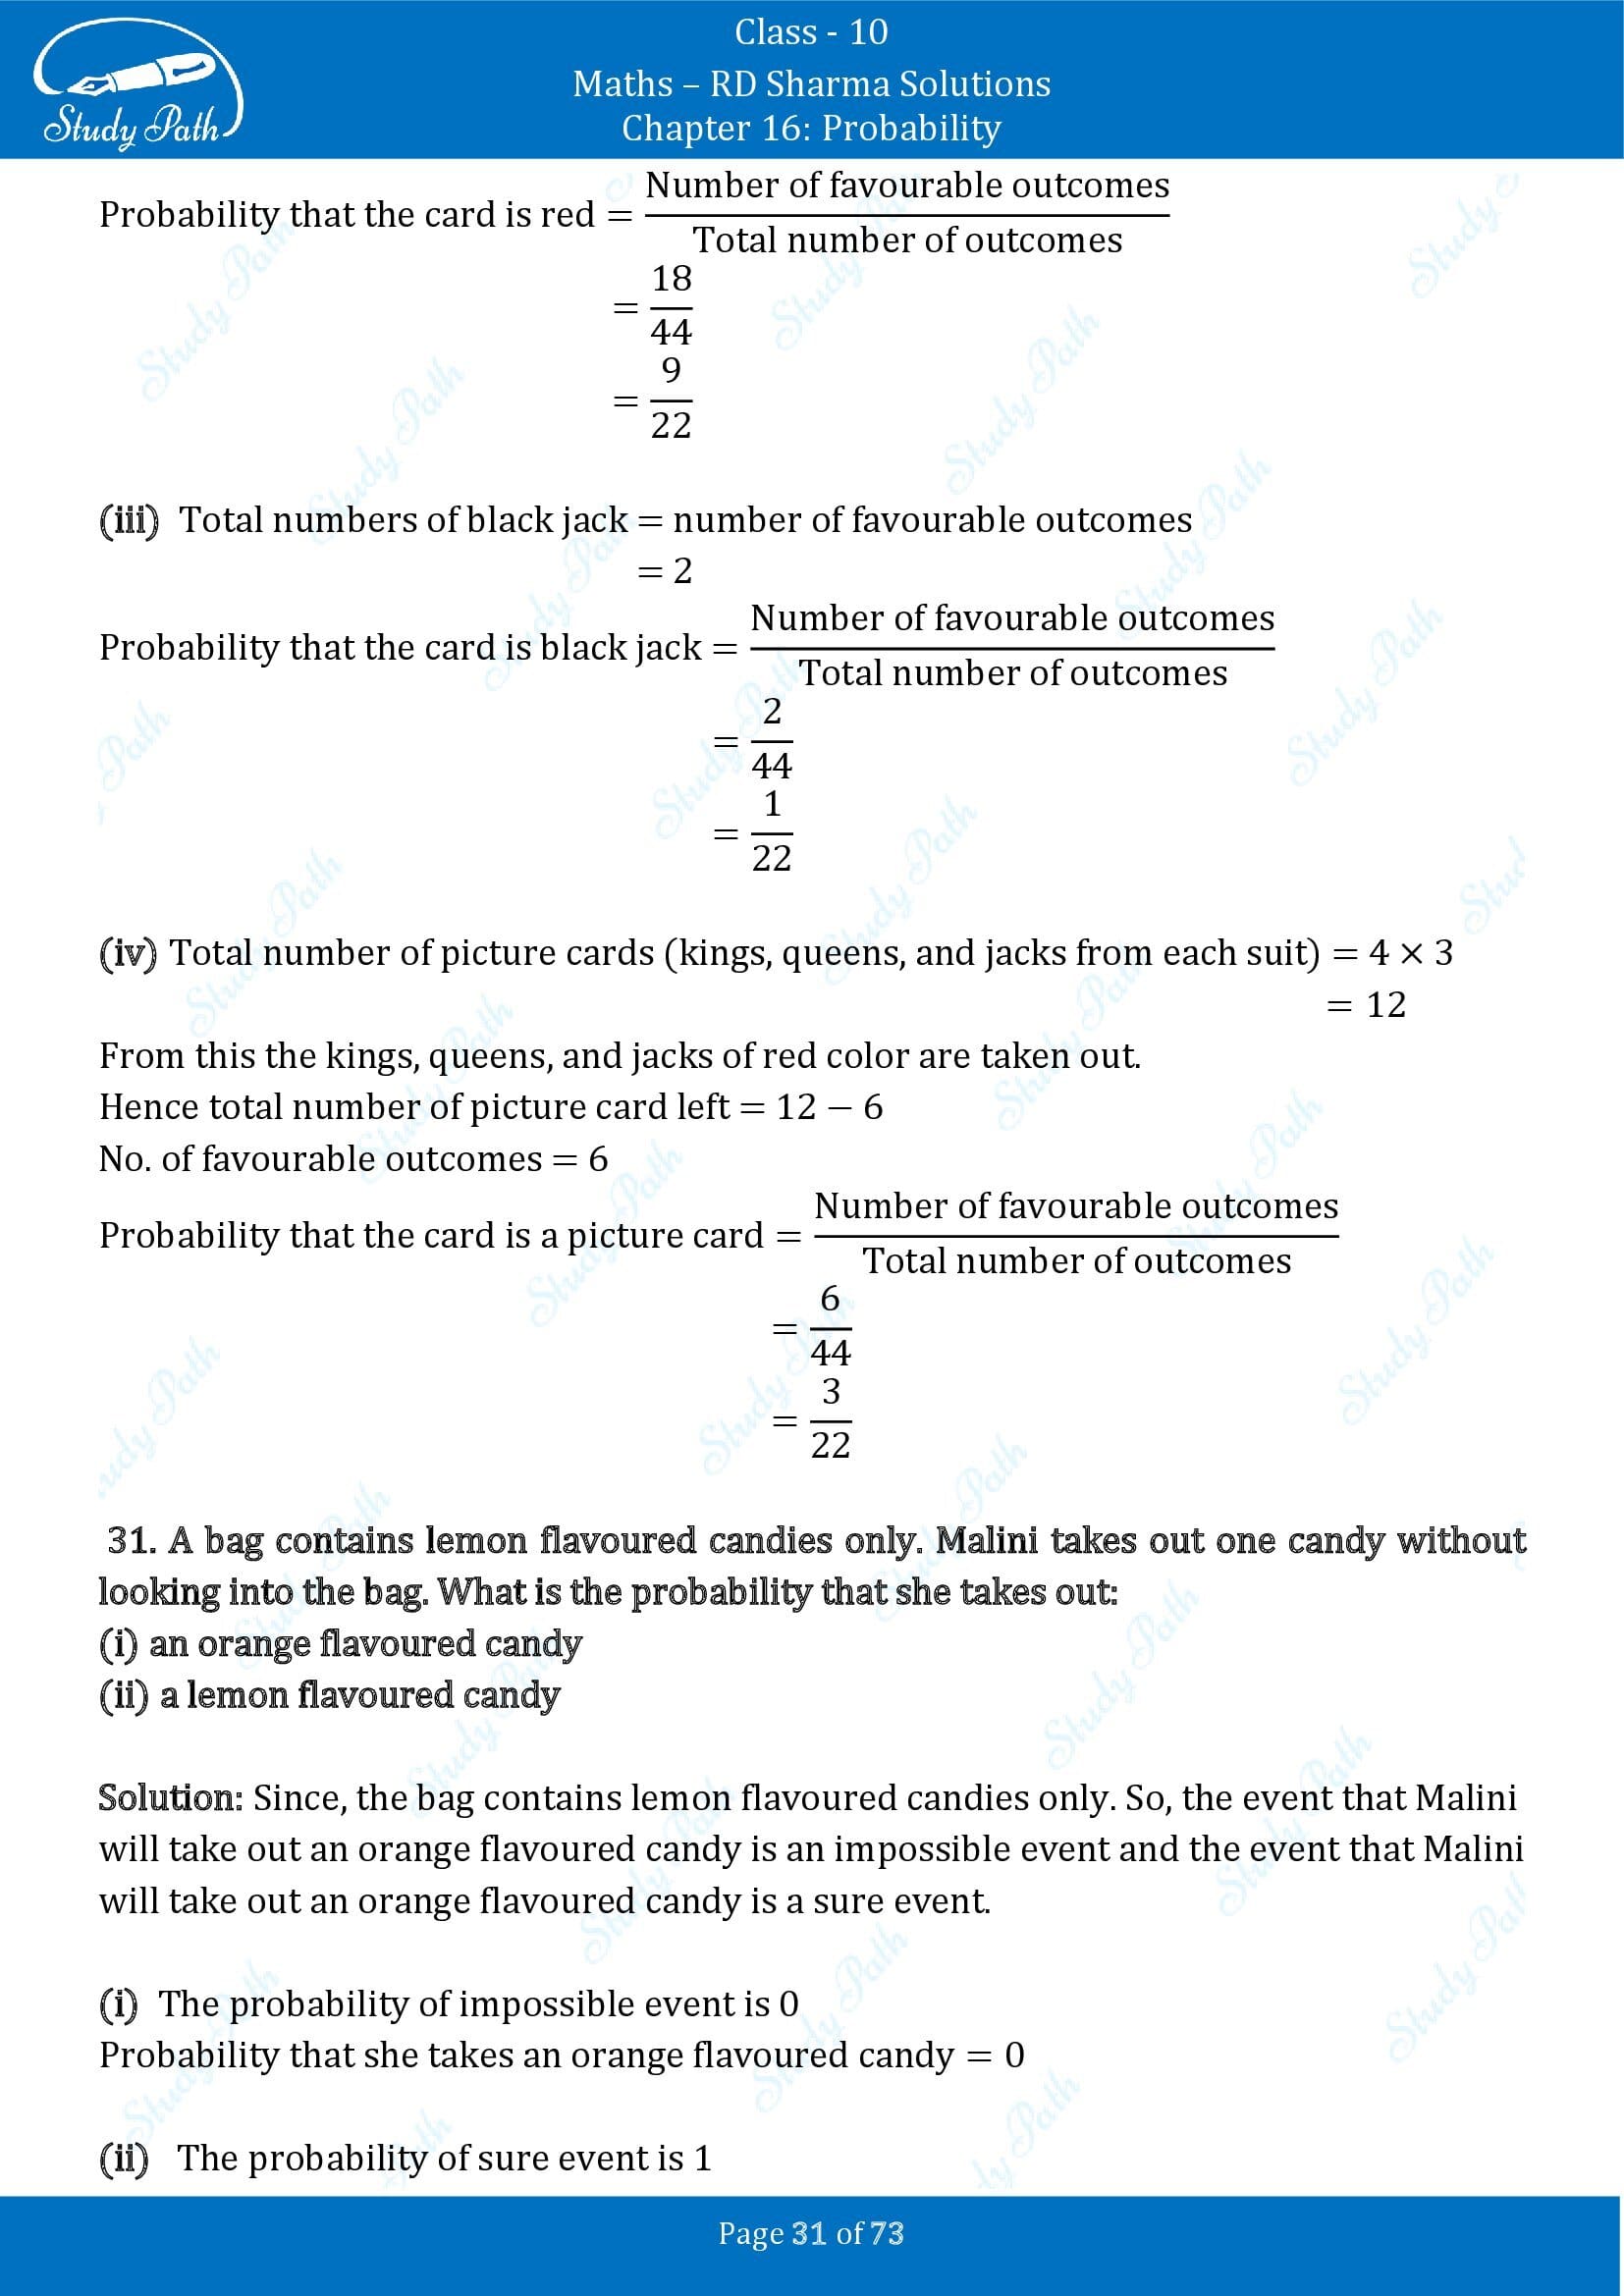 RD Sharma Solutions Class 10 Chapter 16 Probability Exercise 16.1 00031